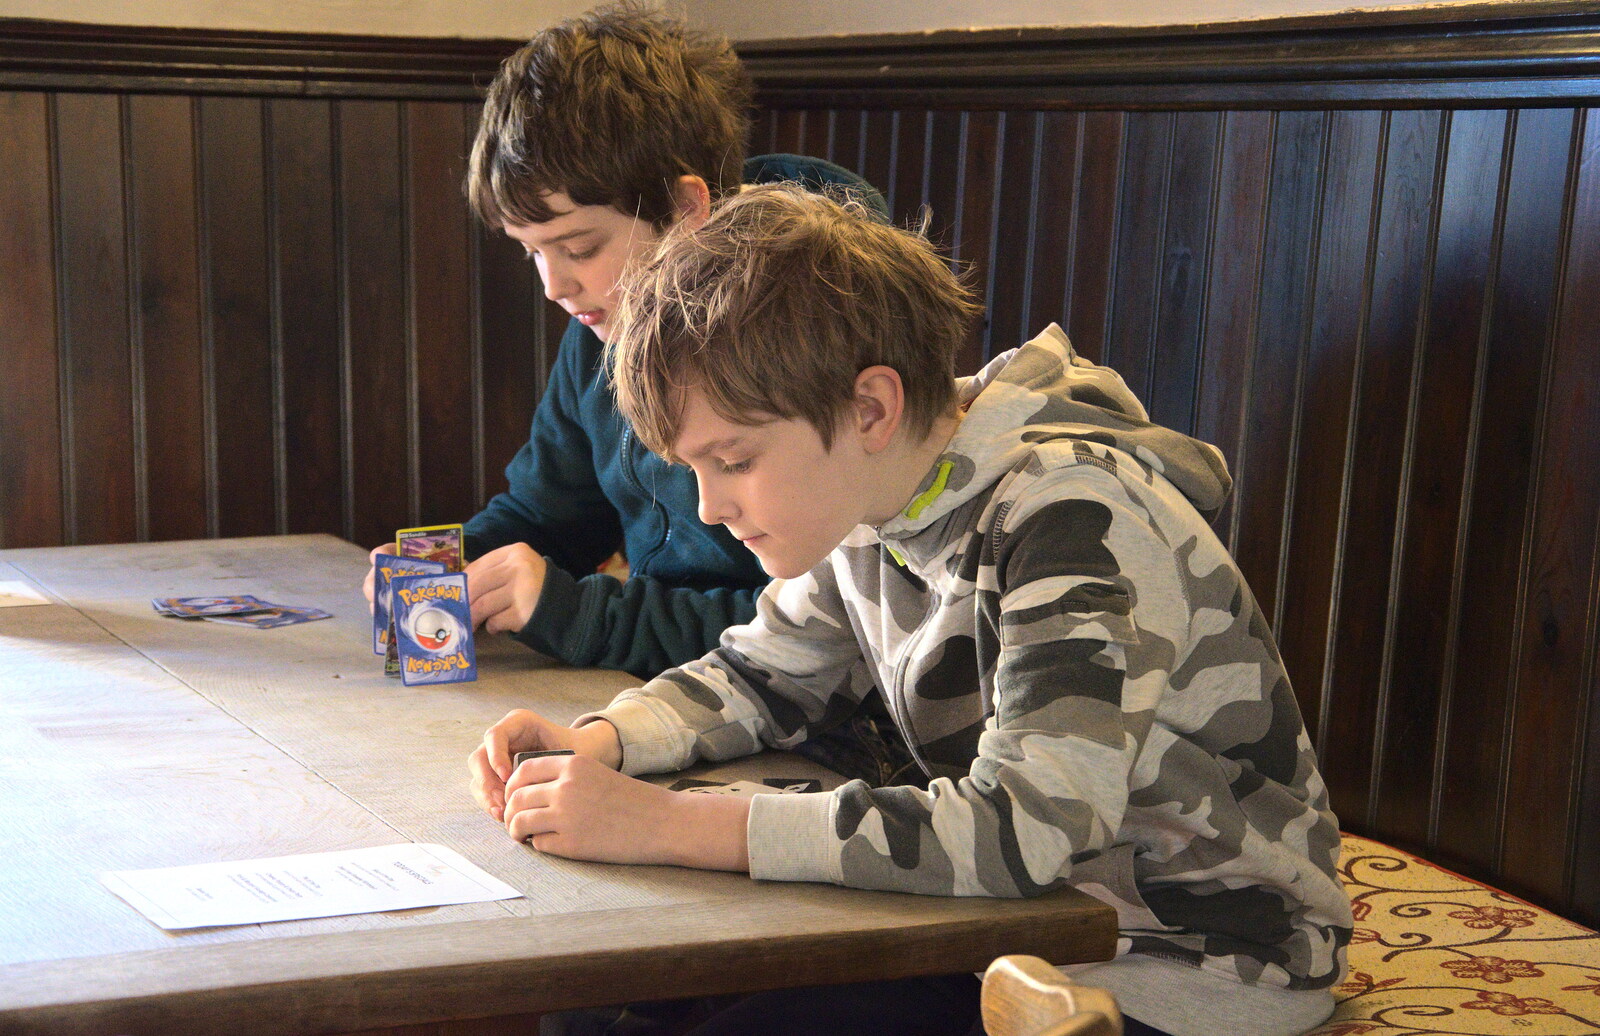 The boys concentrate on card-house building from A Trip to Orford Castle, Orford, Suffolk - 26th February 2022